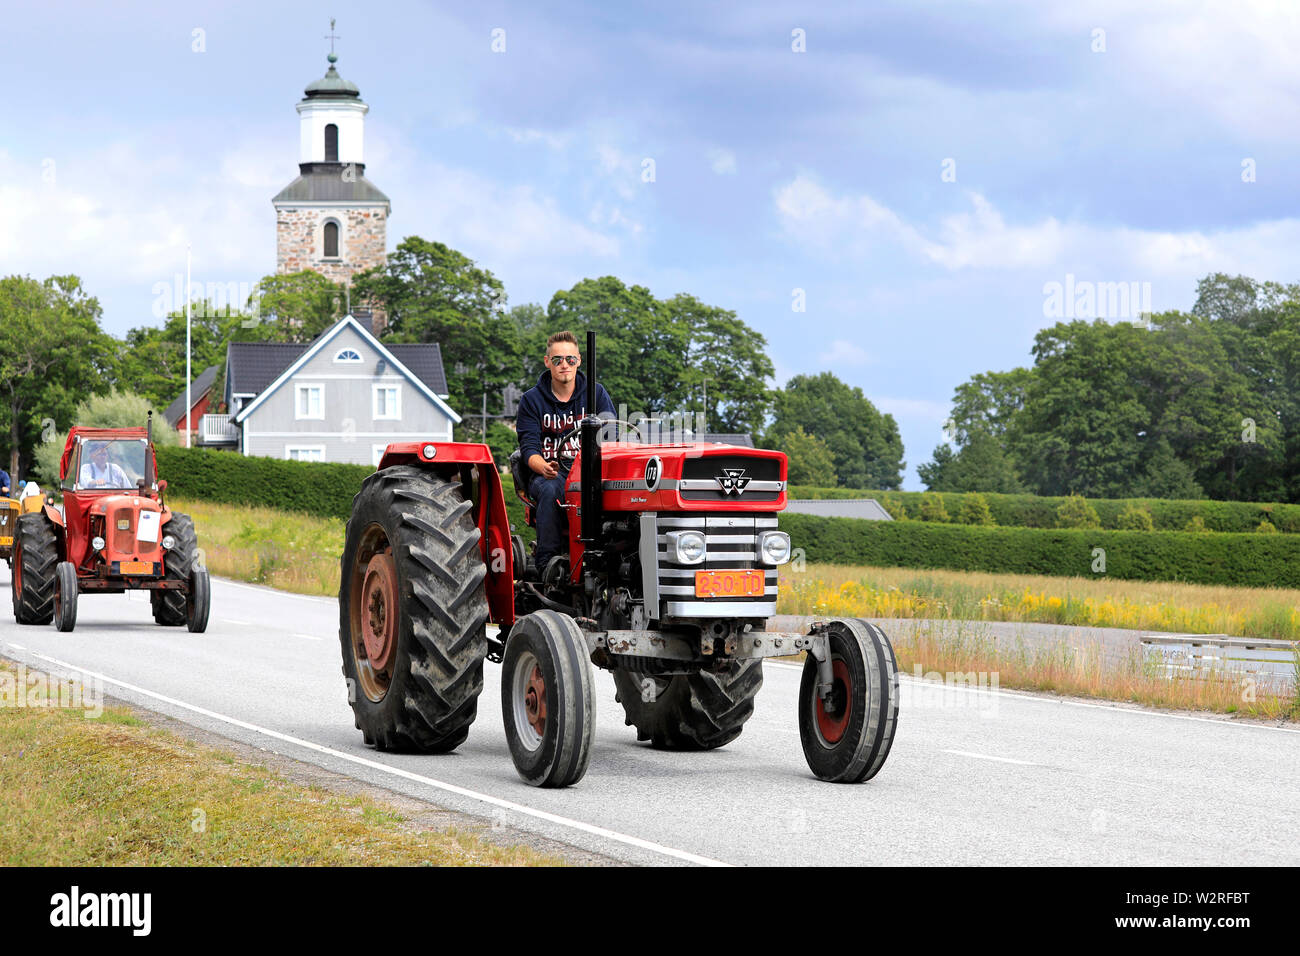 Kimito, Finland. July 6, 2019. Young man drives Massey Ferguson 178 Multi-Power tractor on Kimito Tractorkavalkad, vintage tractor show and parade. Stock Photo